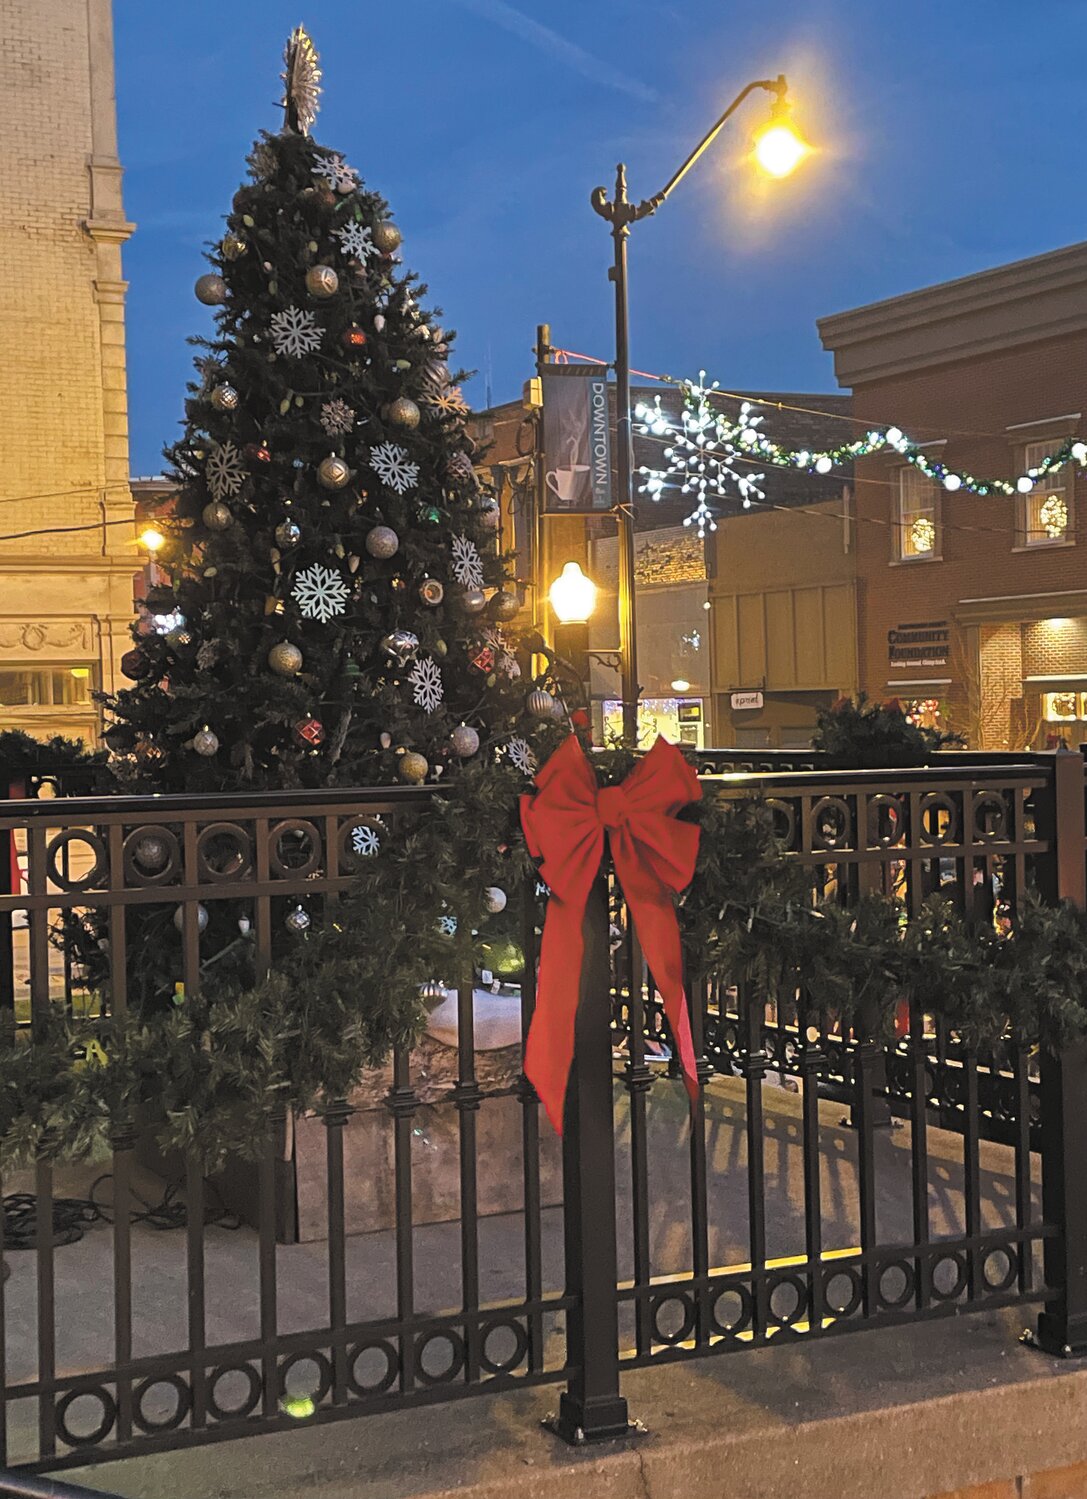 Crowds gathered Saturday for Small Business Saturday and Downtown Party Night. People enjoyed shopping and dining at local establishments, a tree lighting ceremony at the courthouse with this year's honorees, Irma and Ignacio Bravo, listening to live holiday music, children's crafts, hay rides and more.